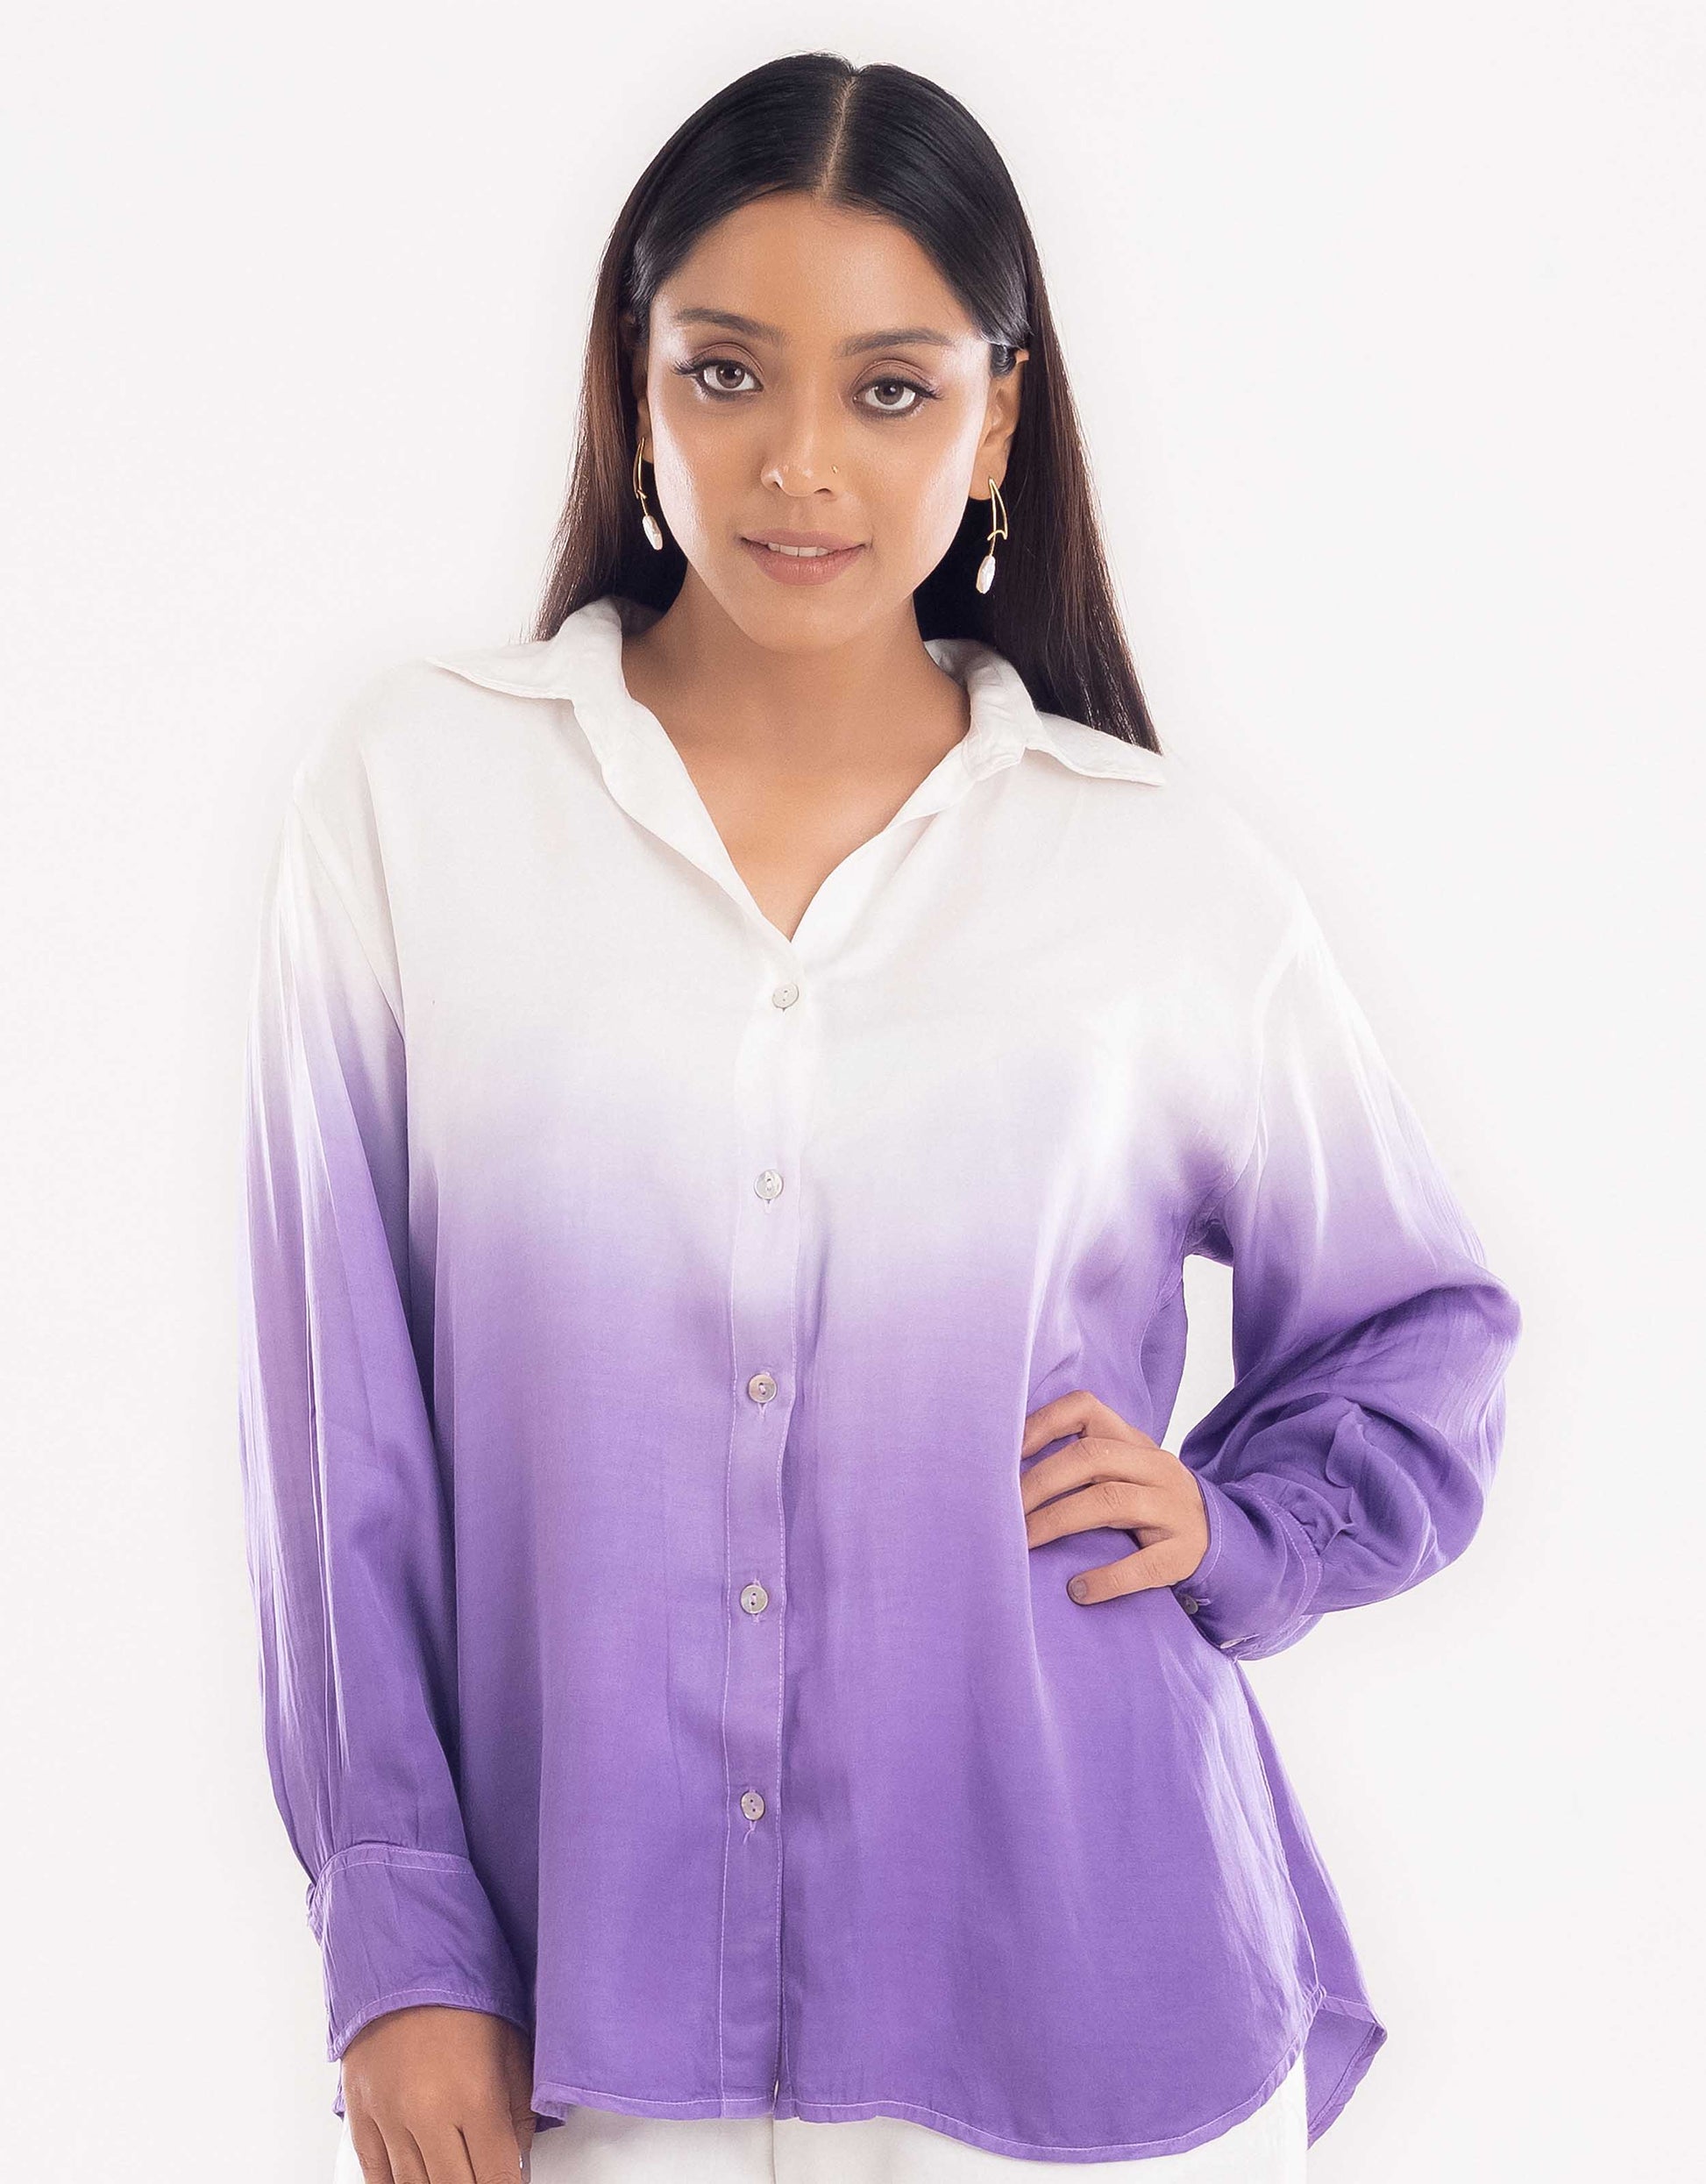 Hueloom purple convertible ombre oversized shirt front view in regular shirt style.